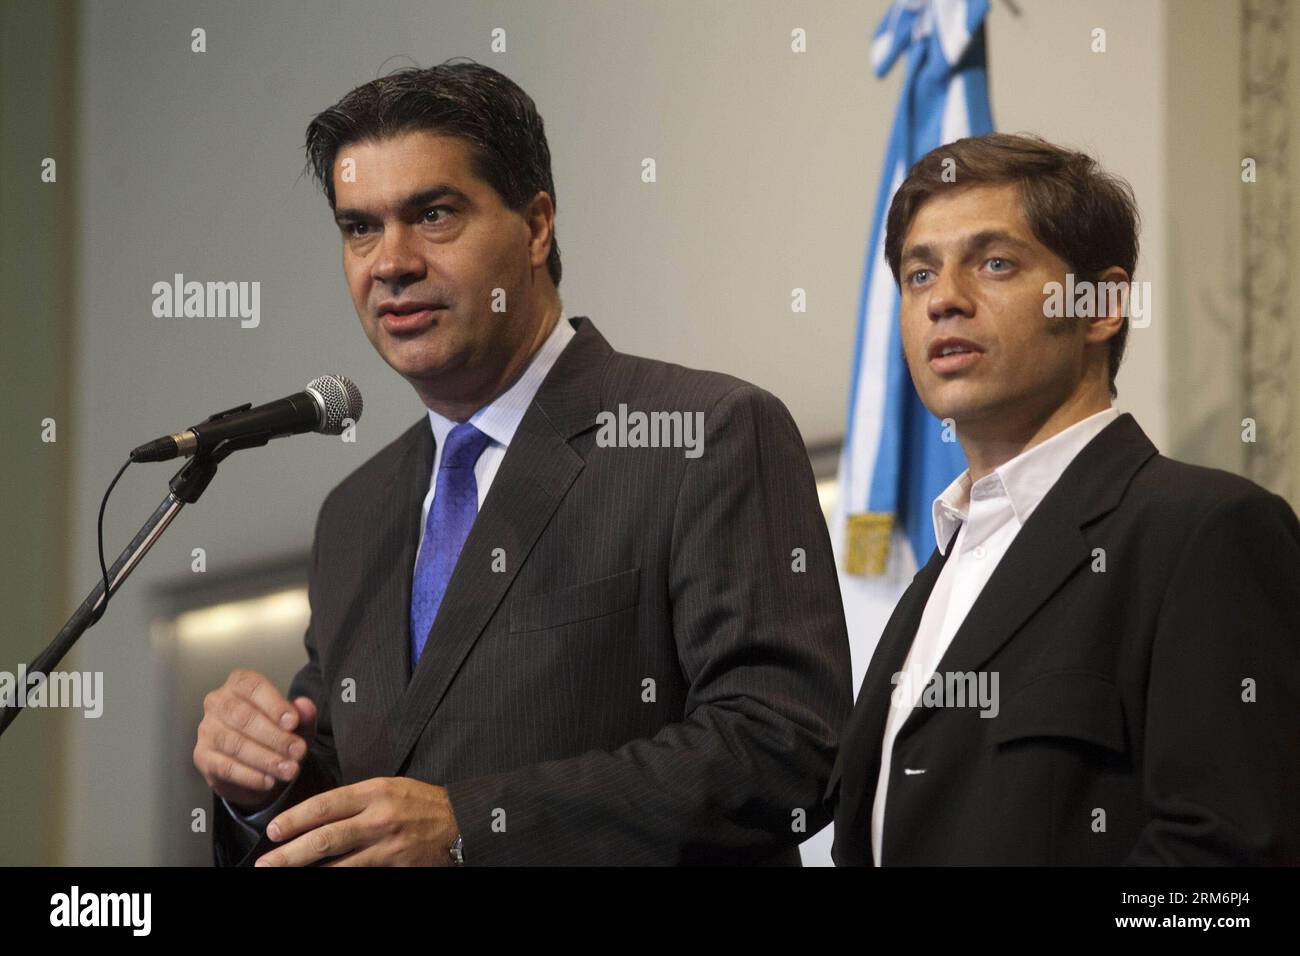 BUENOS AIRES, Jan. 24, 2014 -- Jorge Capitanich (L), the head of President Cristina Kirchner s cabinet, speaks next to the Economy Minister Axel Kicillof during a press conference in the presidential palace in Buenos Aires, Argentina, Jan. 24, 2014. Capitanich announced the move after the peso on Thursday suffered its worst one-day dive since 2002, explaining that the controls had always been viewed as temporary and had served their purpose.(Xinhua/Ricardo Ceppi/TELAM)(zhf) ARGENTINA-BUENOS AIRES-POLITICS-KICILLOF PUBLICATIONxNOTxINxCHN   Buenos Aires Jan 24 2014 Jorge  l The Head of President Stock Photo